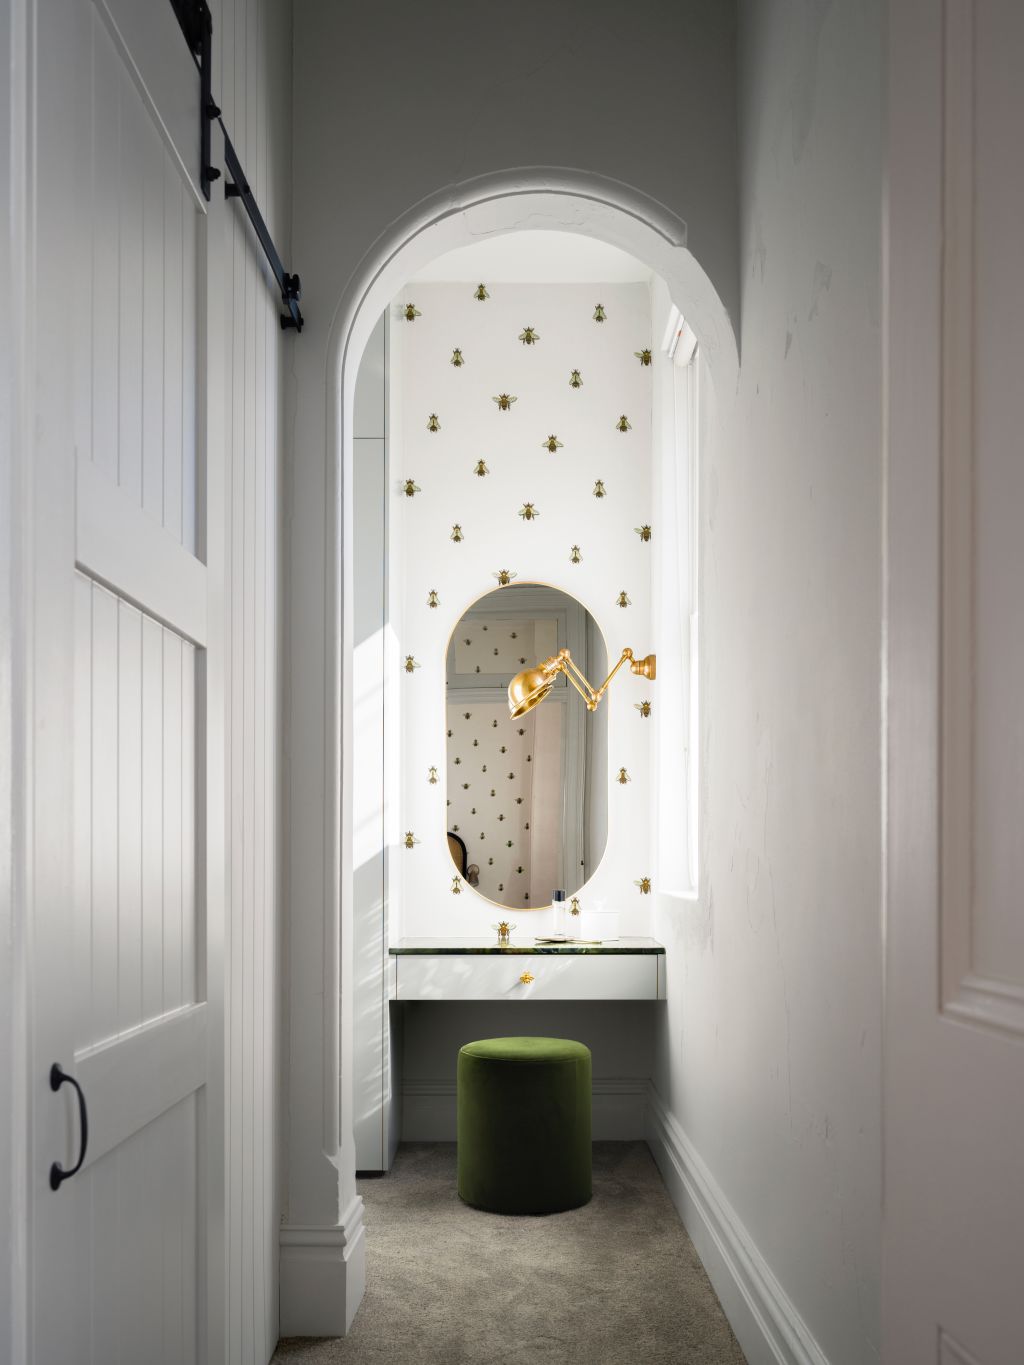 Next to the outdoor vegetable garden and bee hive is the 'Bee Room', a small bee-embossed wallpaper-wrapped space that acts as a dressing room. Photo: Justin Alexander